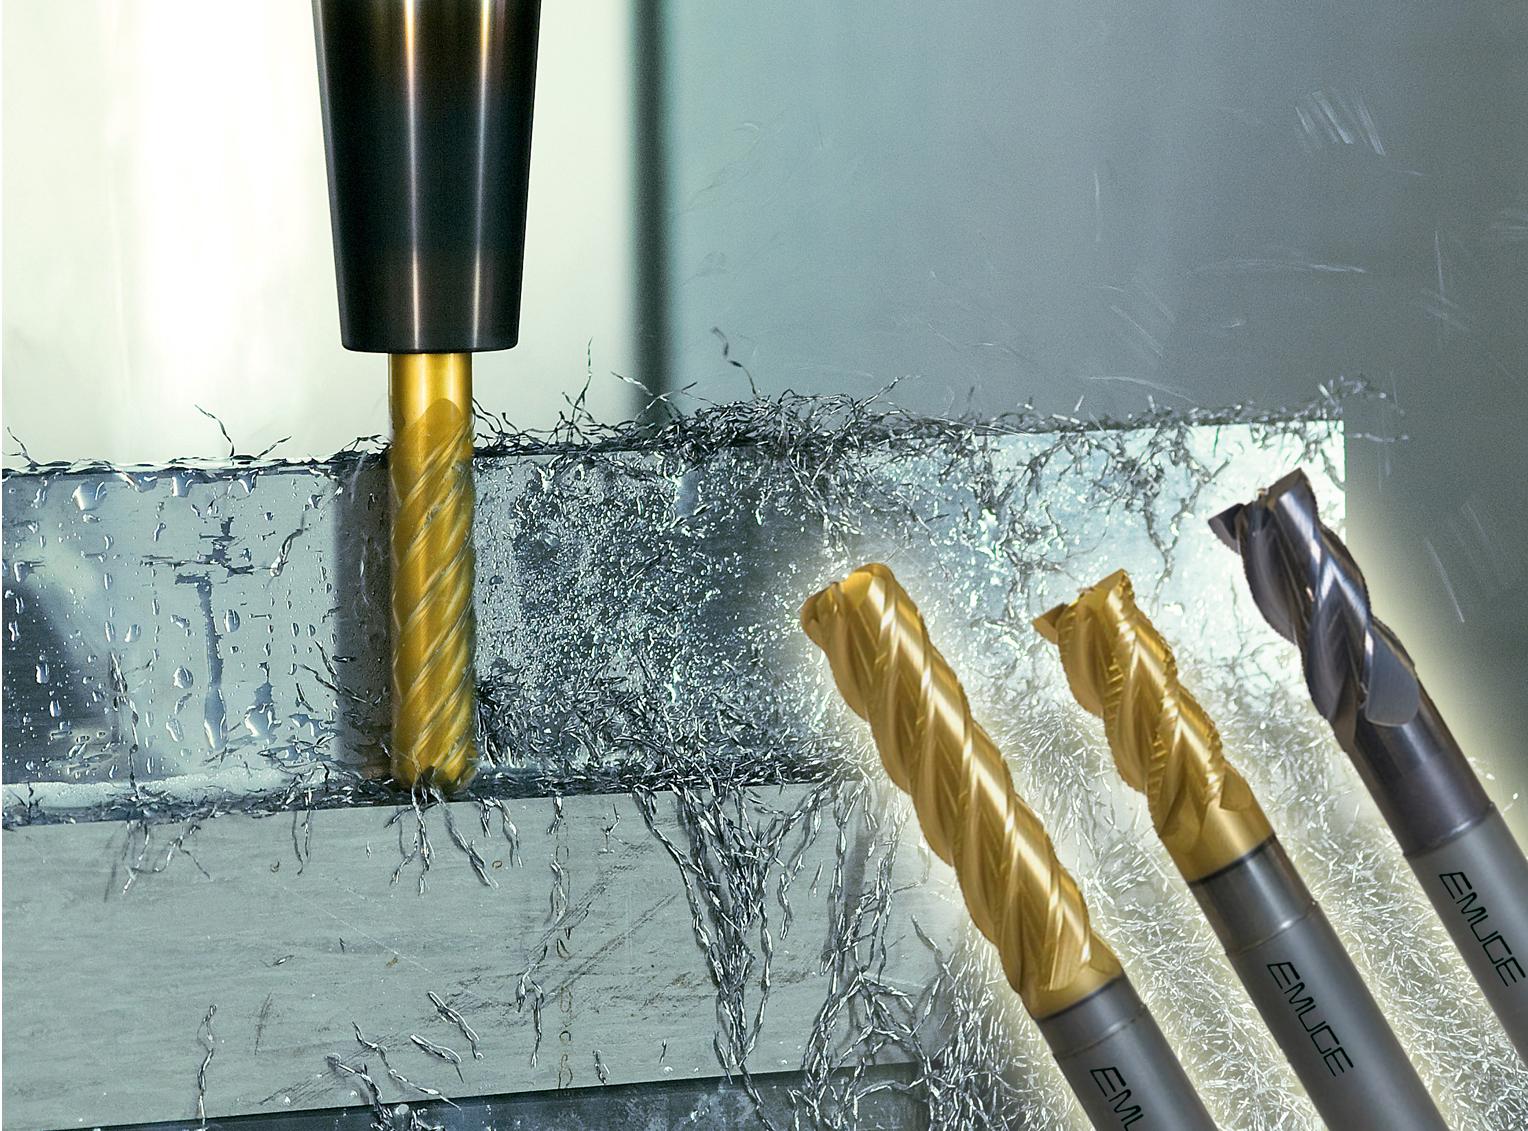 New end mills offer reliability, efficiency and long tool life